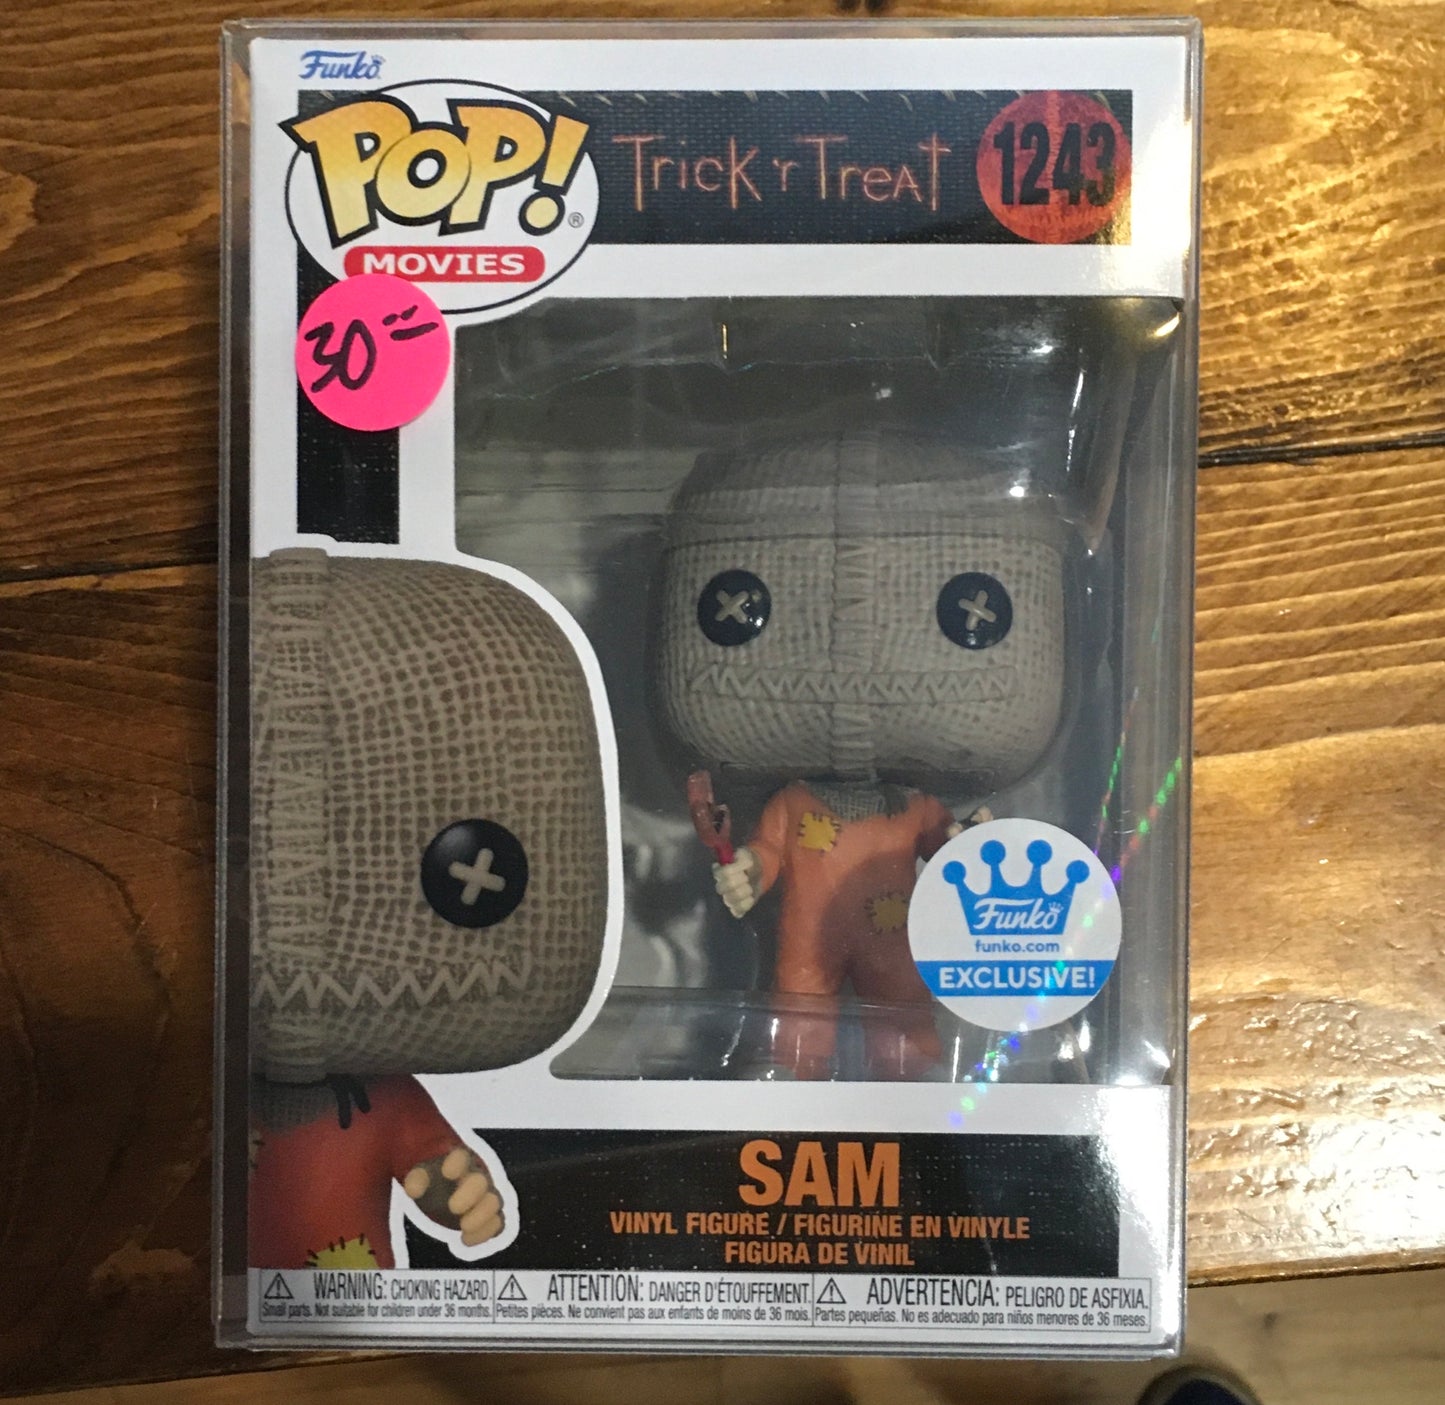 Trick 'r Treat - Sam with candy #1243 exclusive - Funko Pop! Vinyl Figure (Movies)